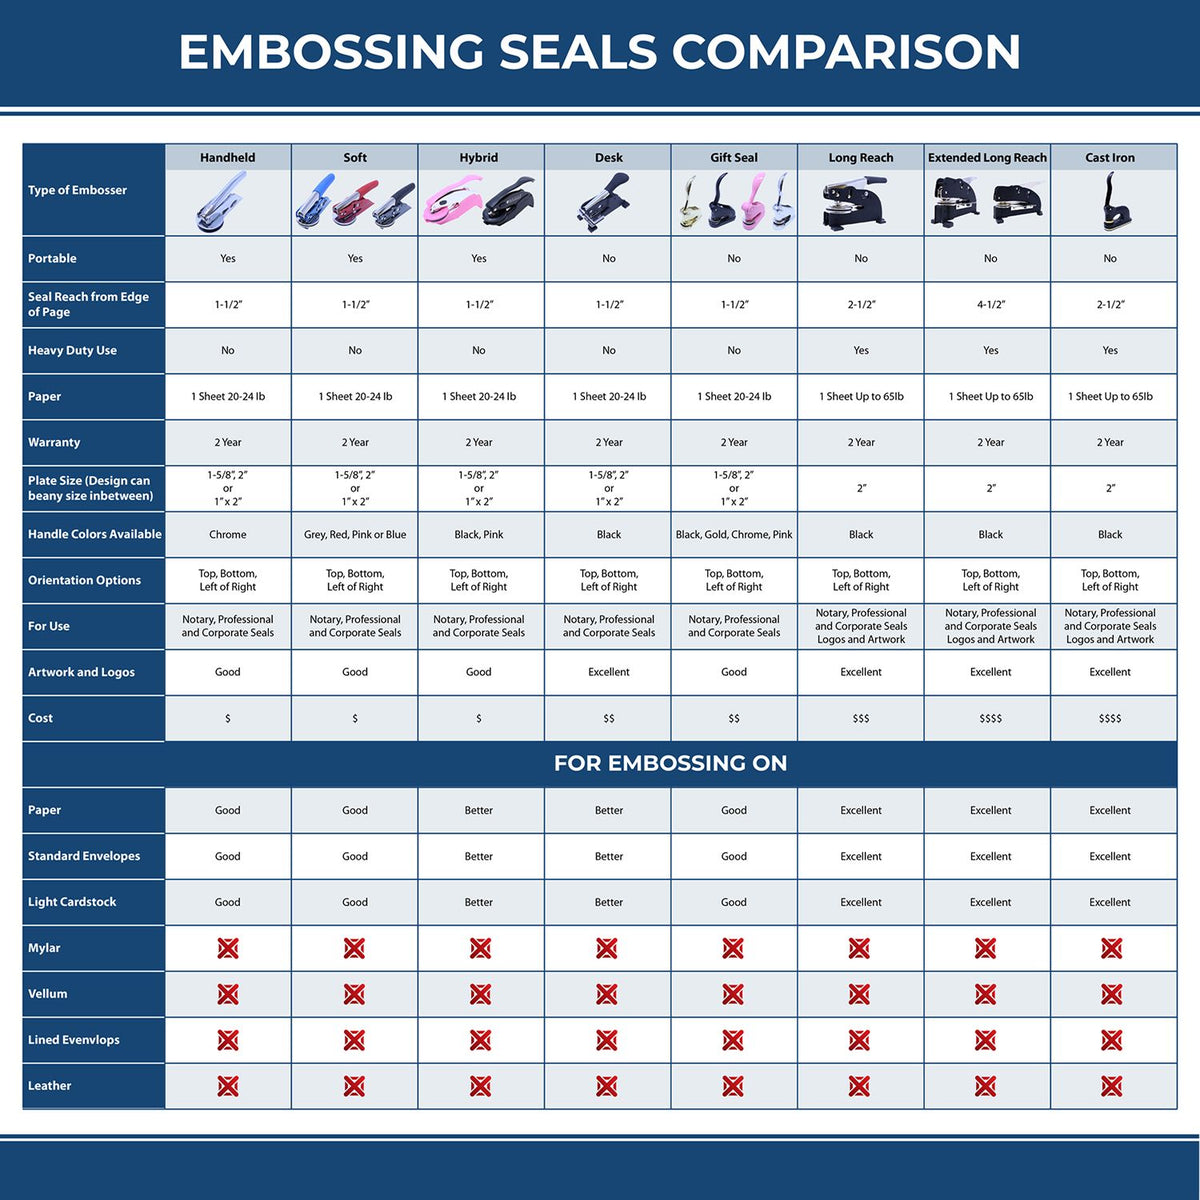 A comparison chart for the different types of mount models available for the Michigan Engineer Desk Seal.